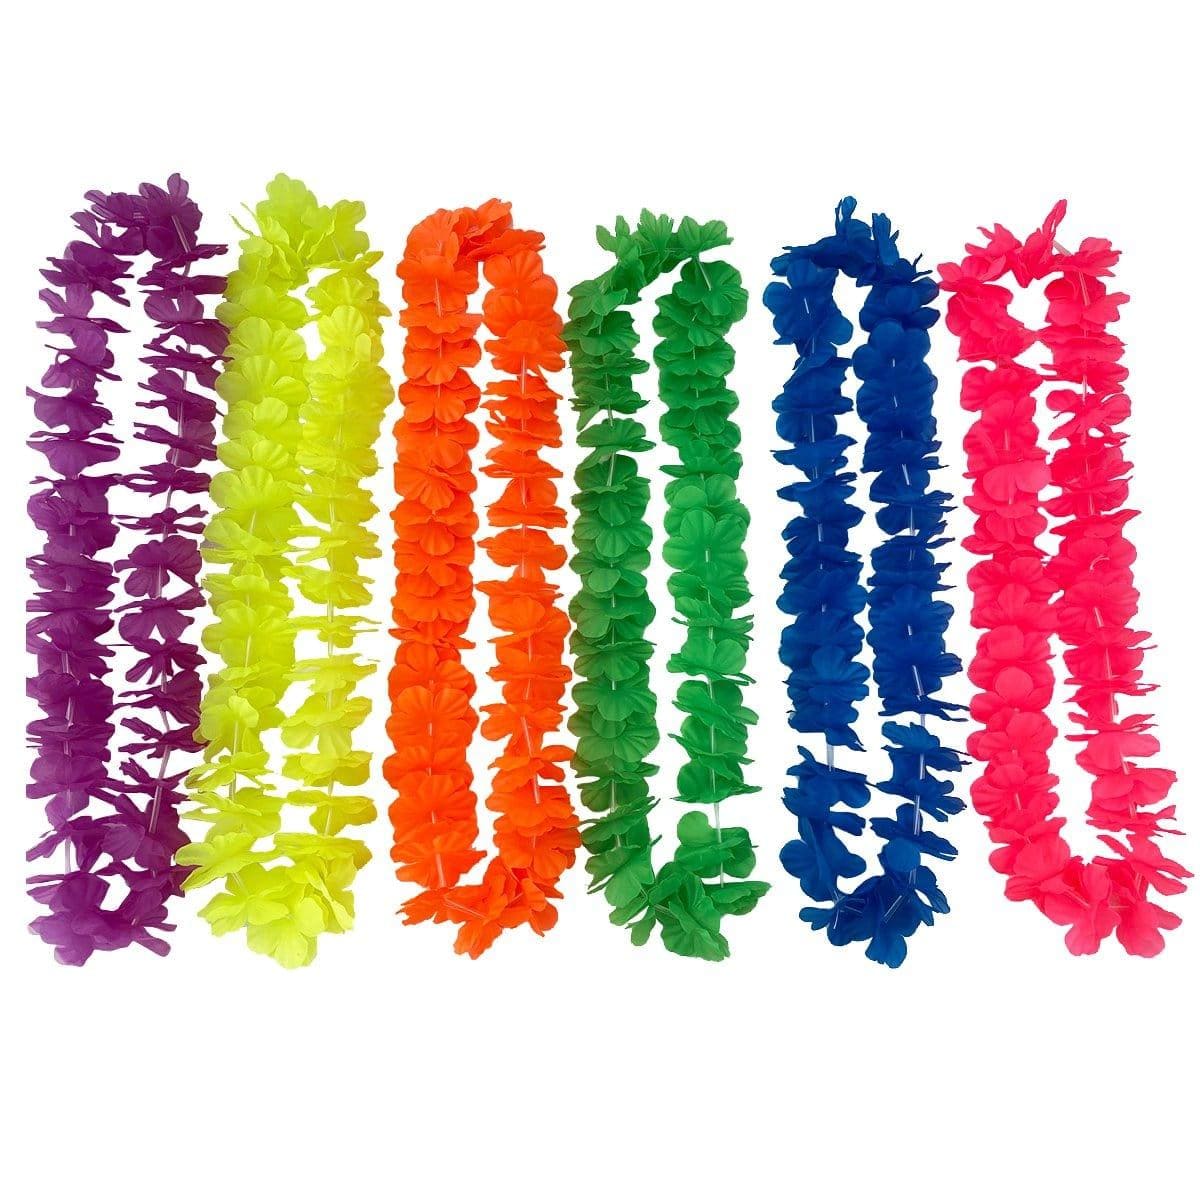 Buy Theme Party Neon Maui Flower Lei Necklaces, 6 per Package sold at Party Expert